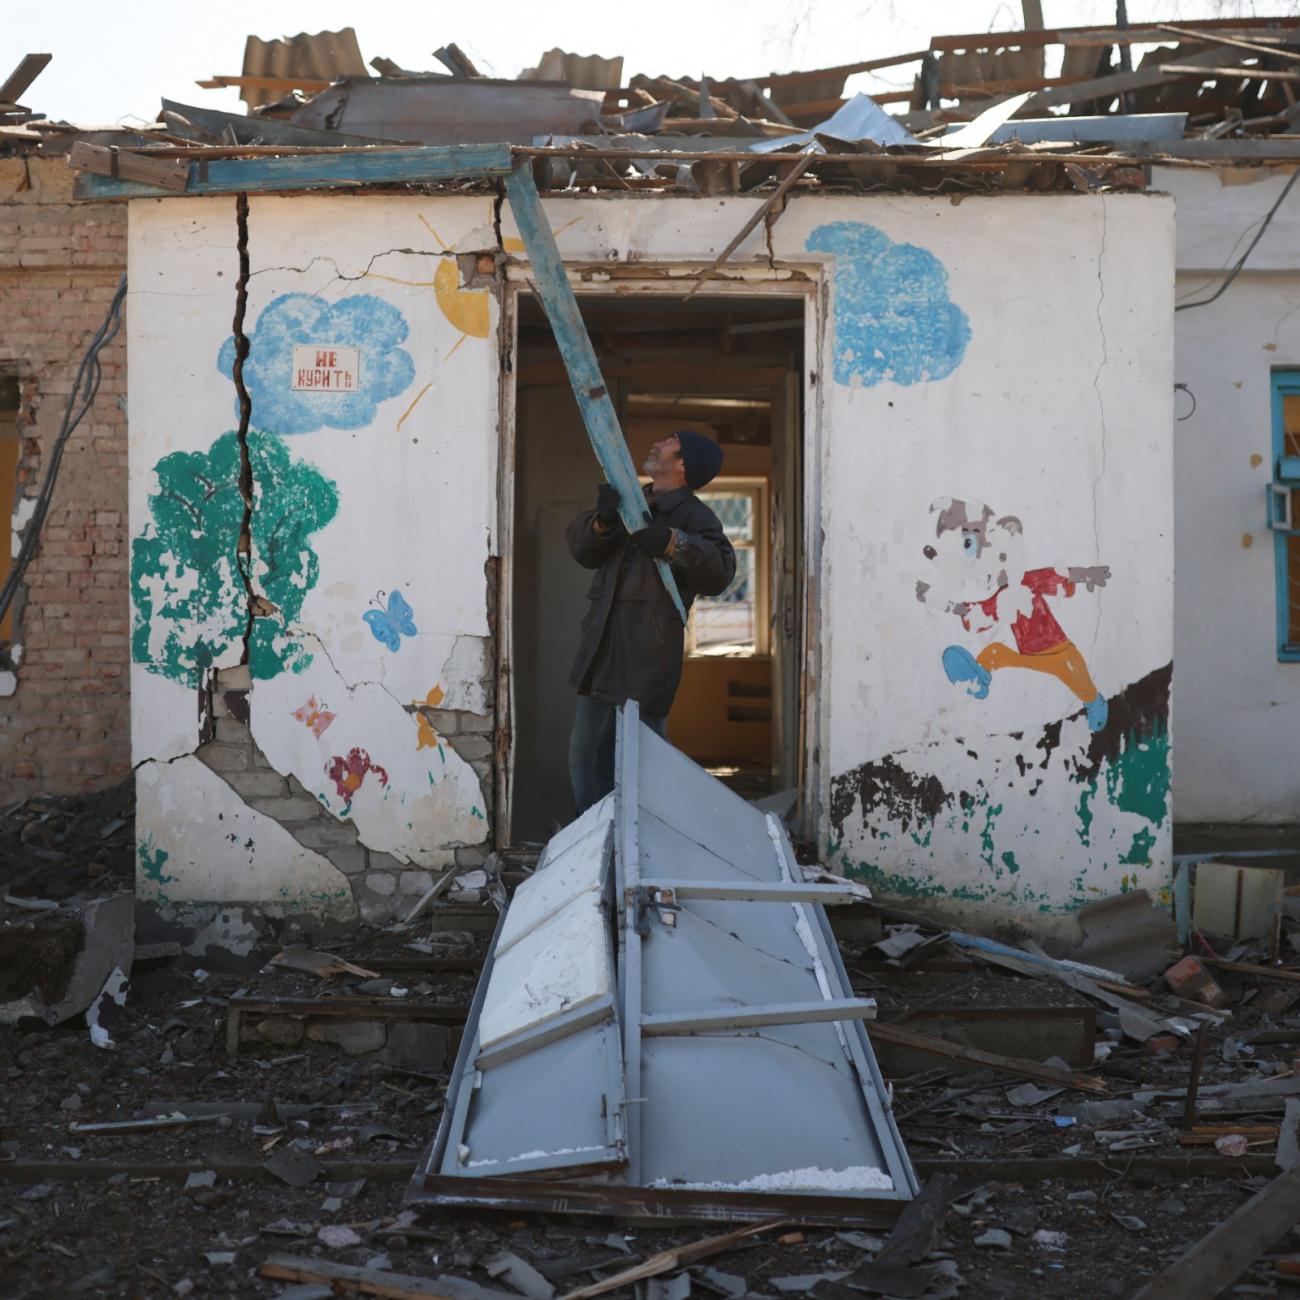 A man clears rubble from a psychiatric hospital that was destroyed by Russian forces